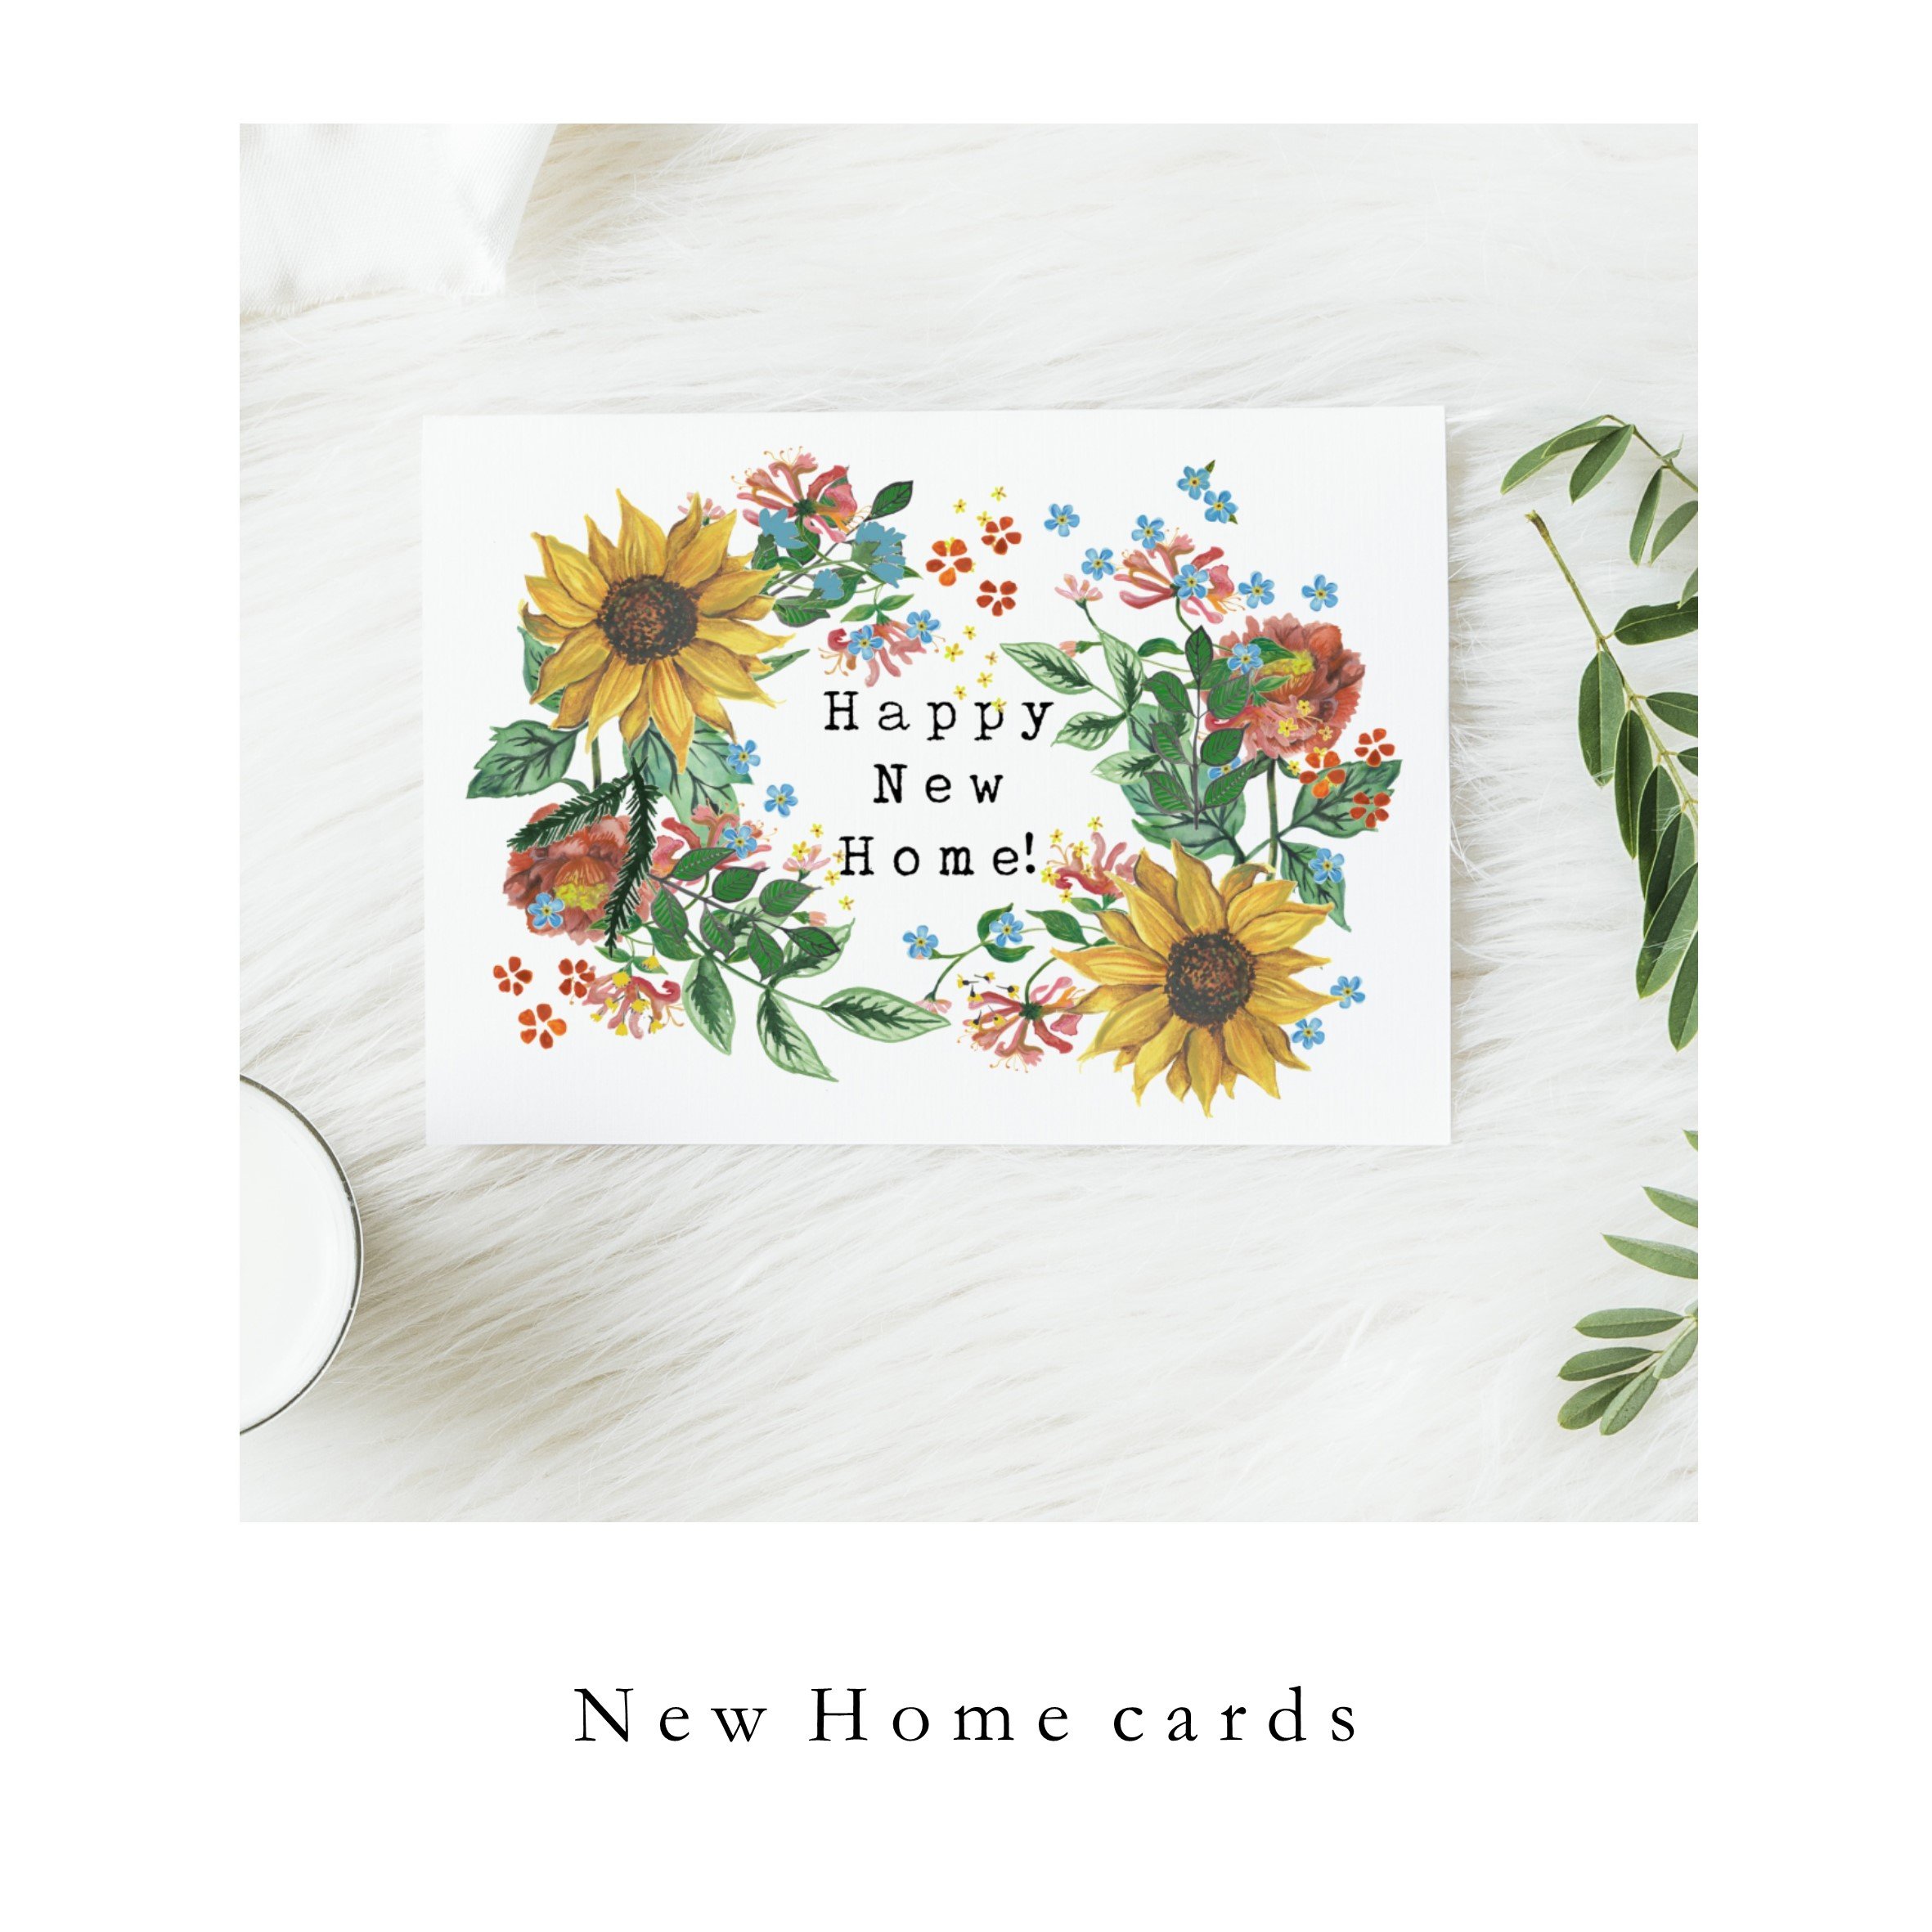 New home cards.jpg